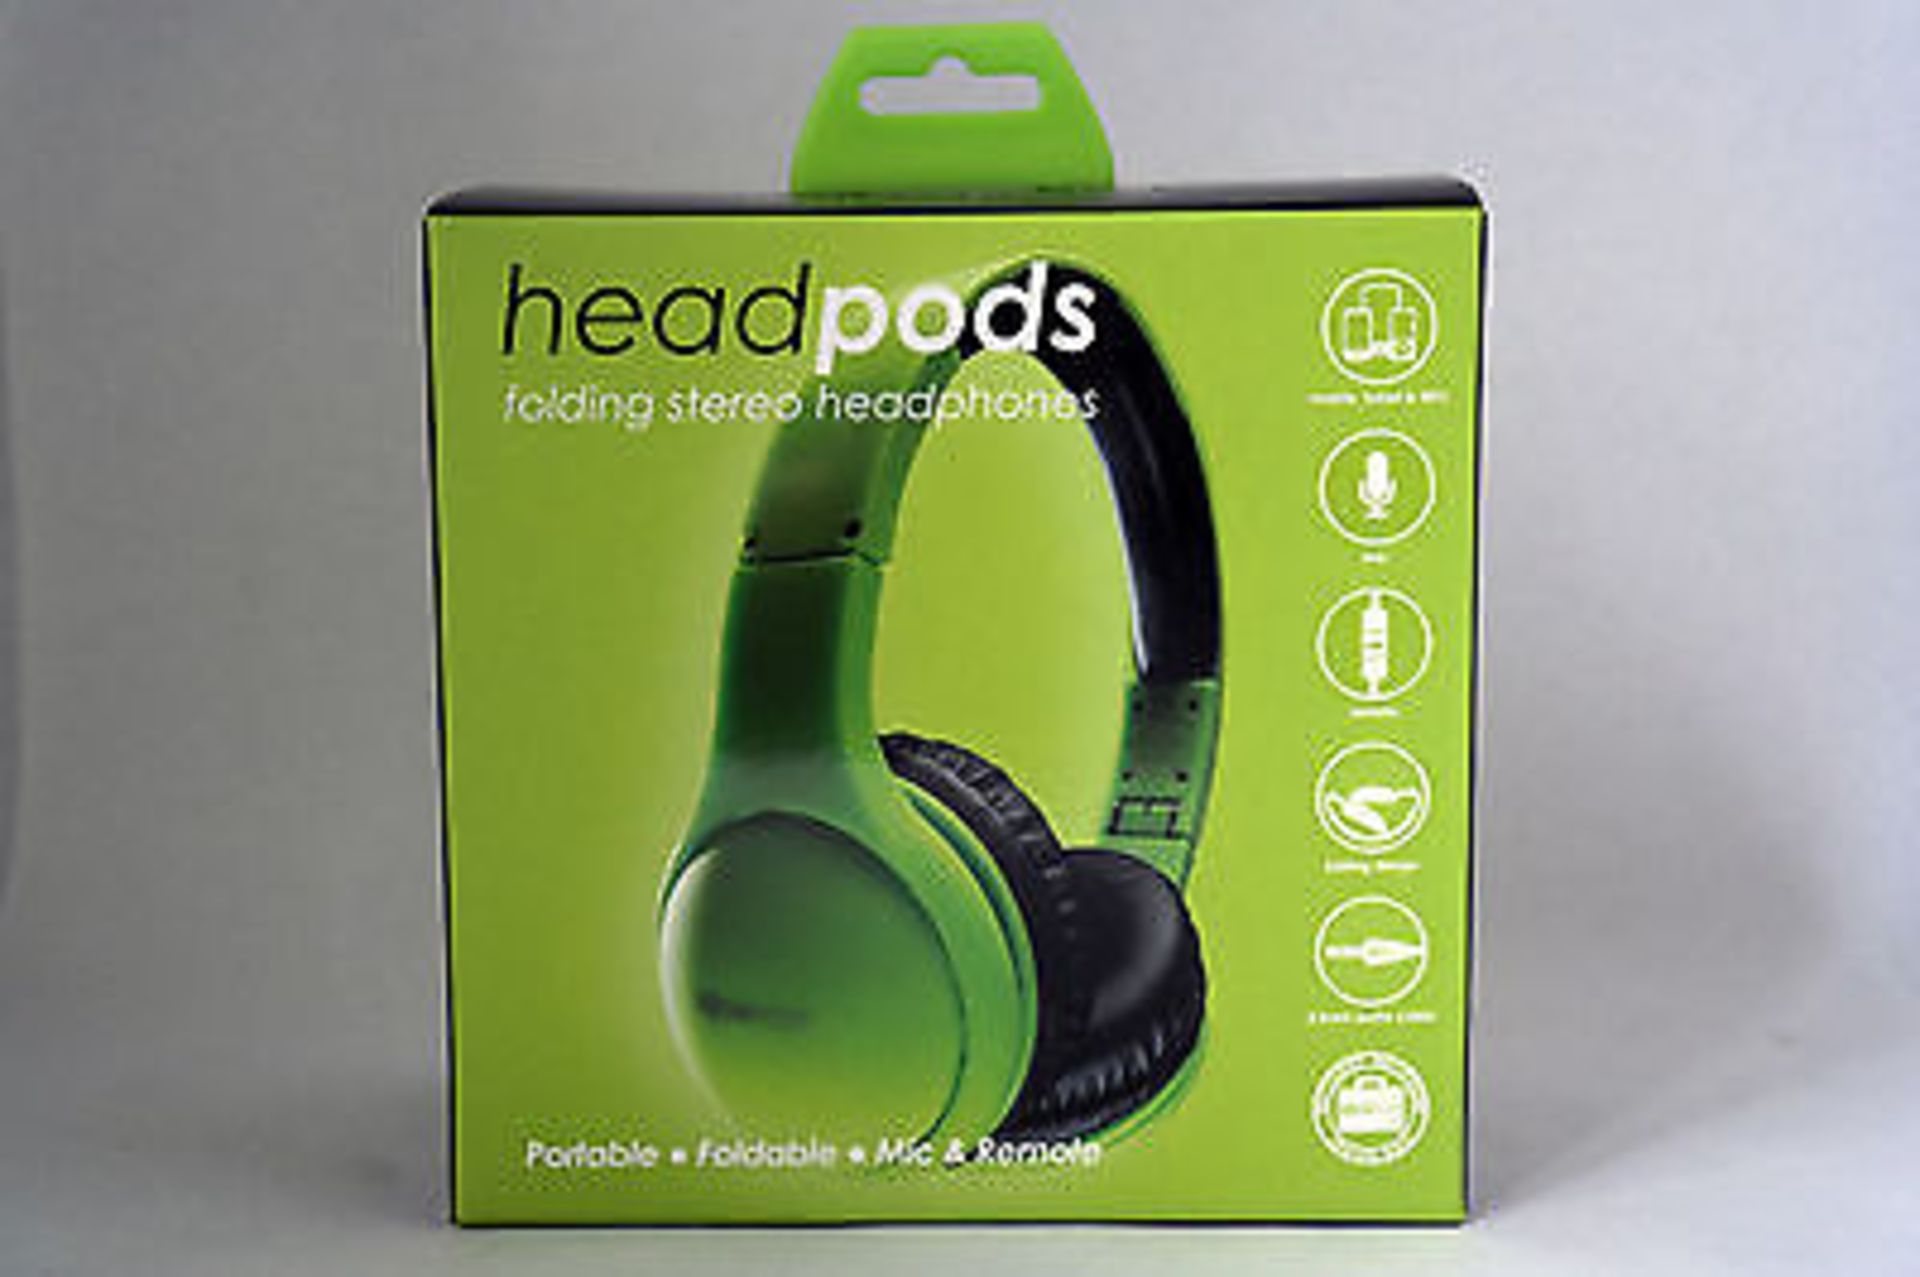 V *TRADE QTY* Brand New Boompods Headpods Foldable Soft Touch Headphones In Green Includes IPhone